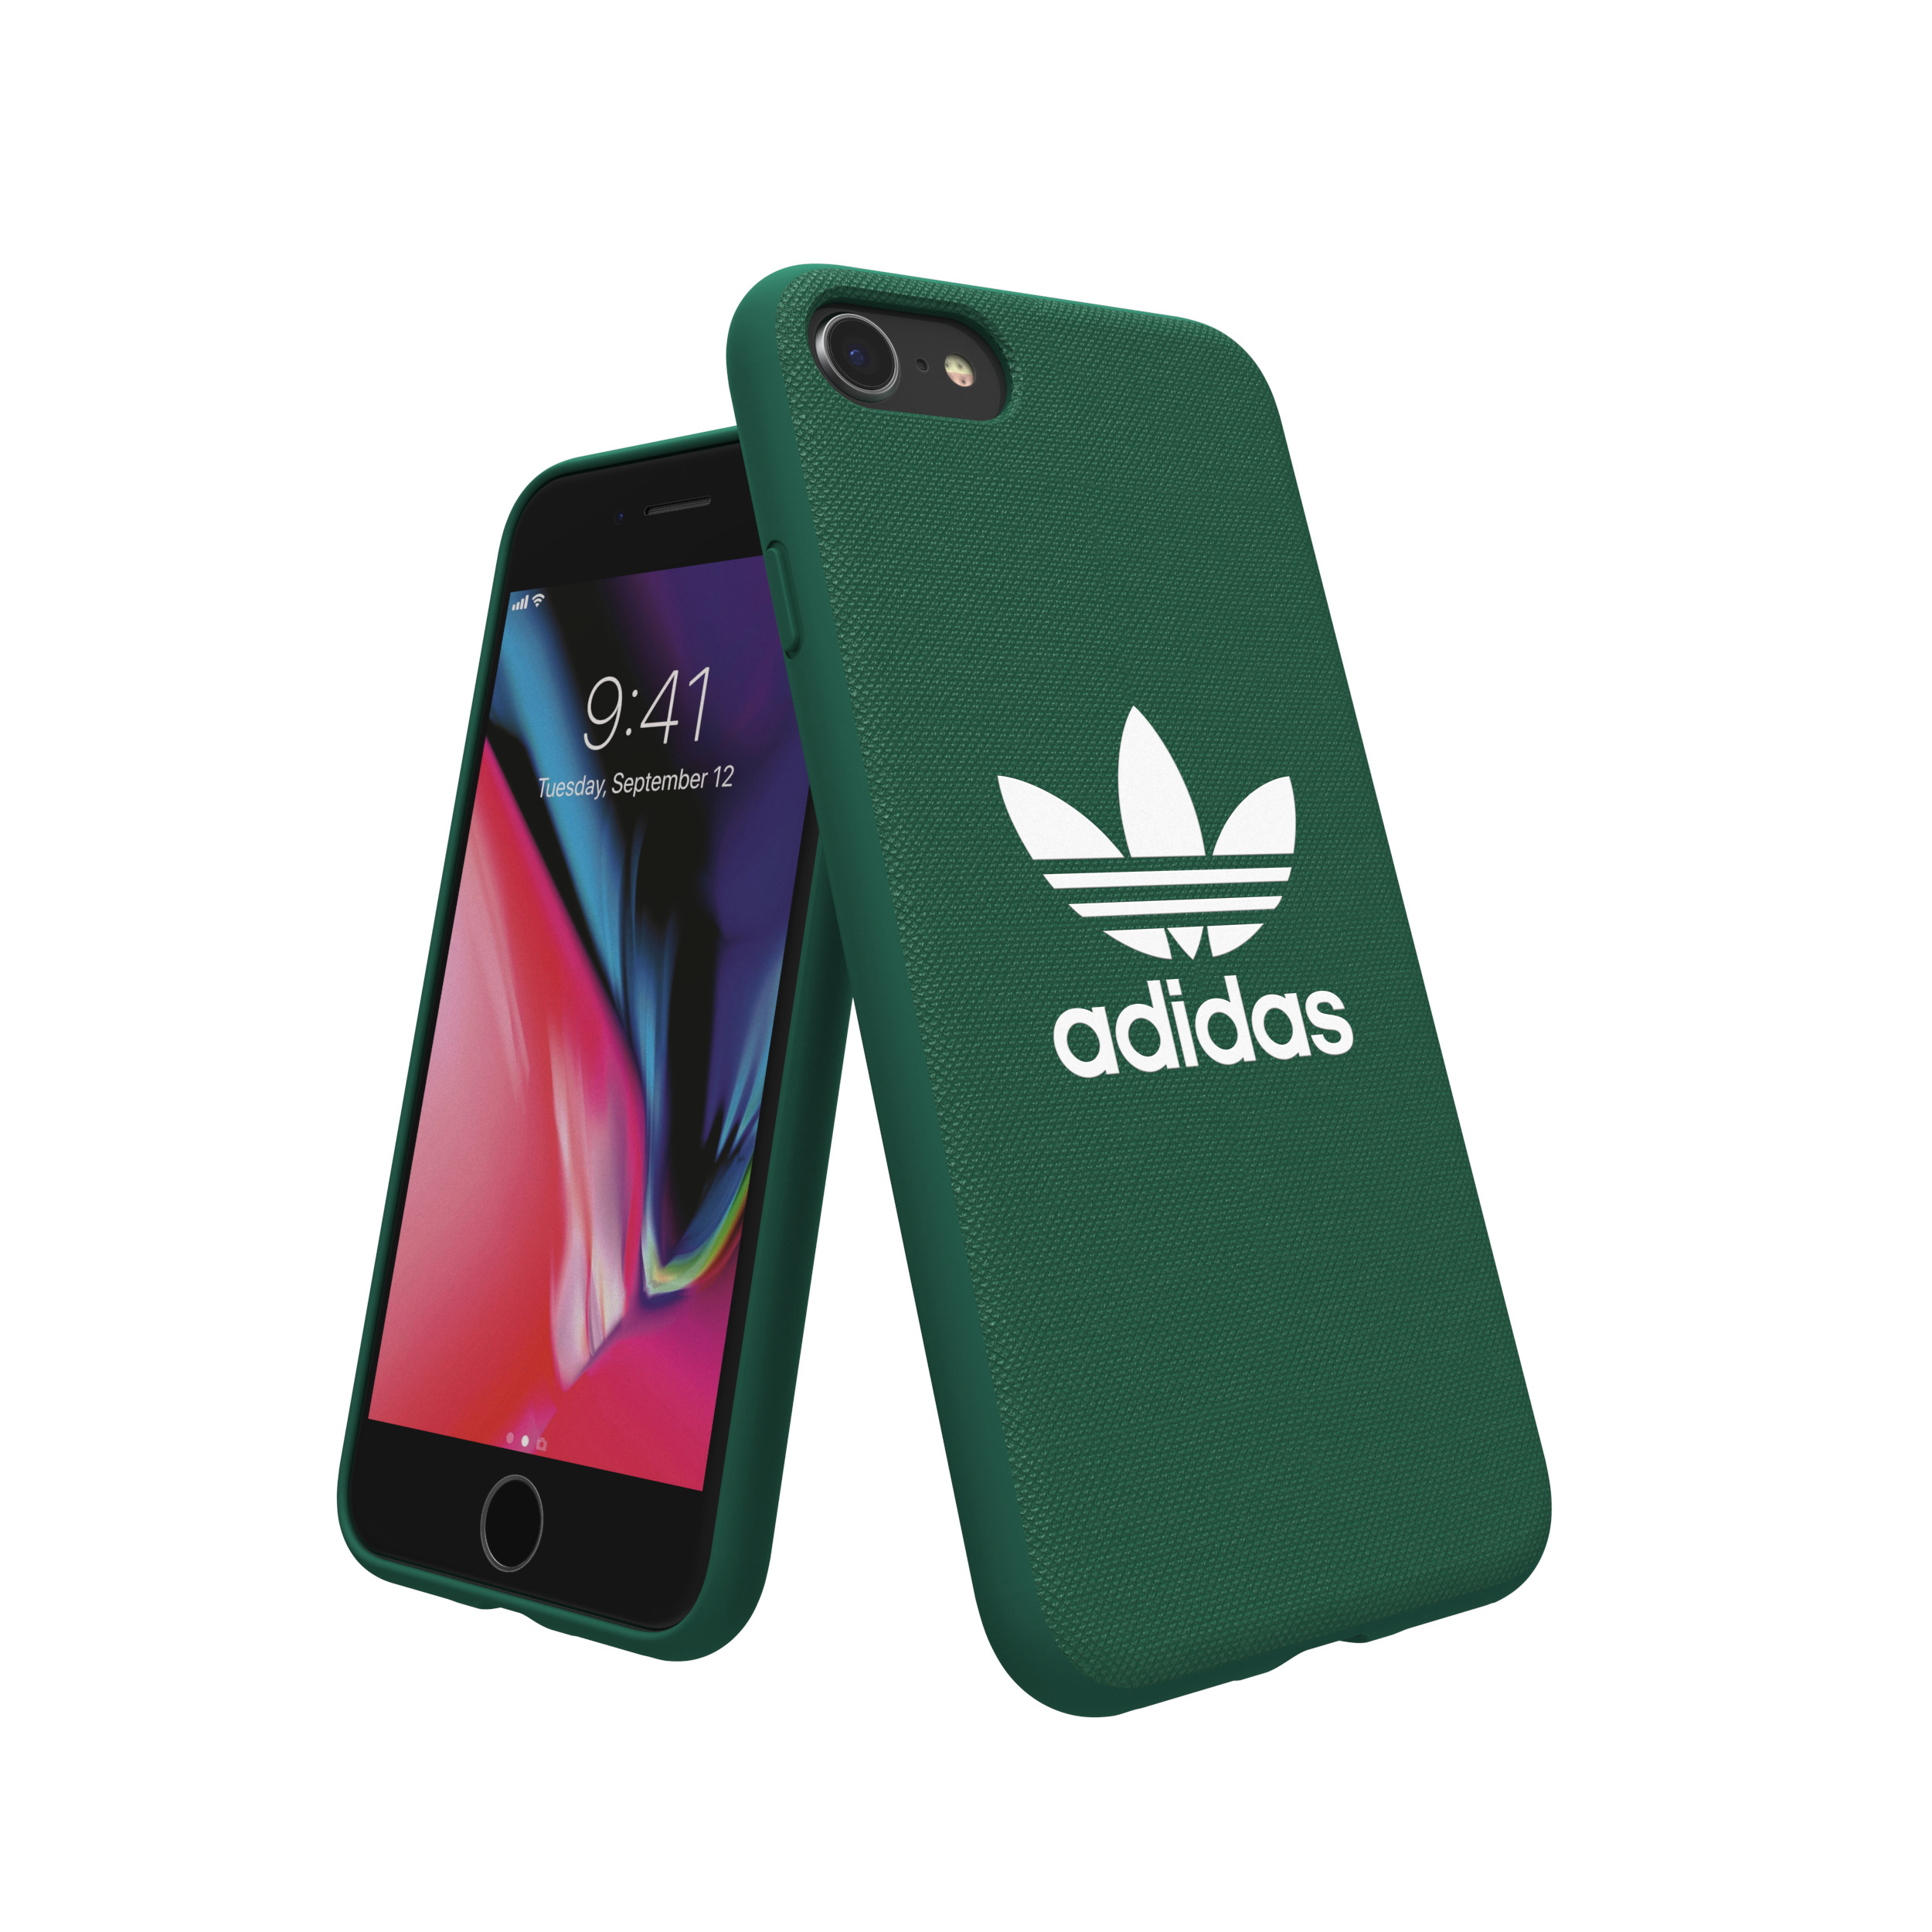 ADIDAS ORIGINALS 7, 8, GREEN, IP 8 7 iPhone Grün MOULDED iPhone Apple, Backcover, 29934 6 6, CASE OR iPhone